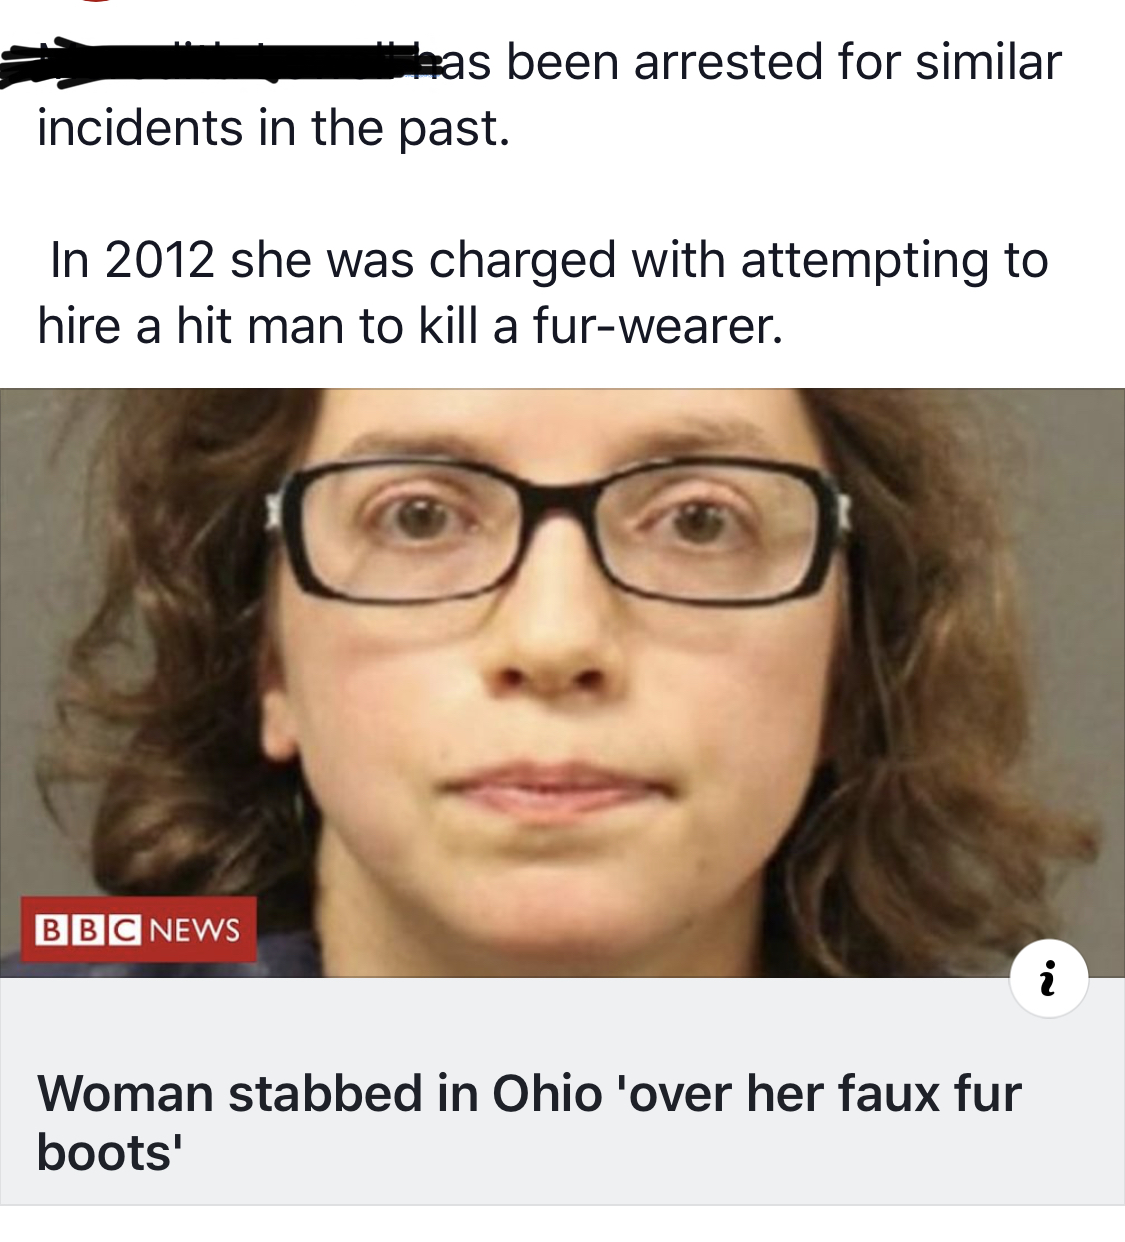 Stabbing - as been arrested for similar incidents in the past. In 2012 she was charged with attempting to hire a hit man to kill a furwearer. Bbc News Woman stabbed in Ohio 'over her faux fur boots'